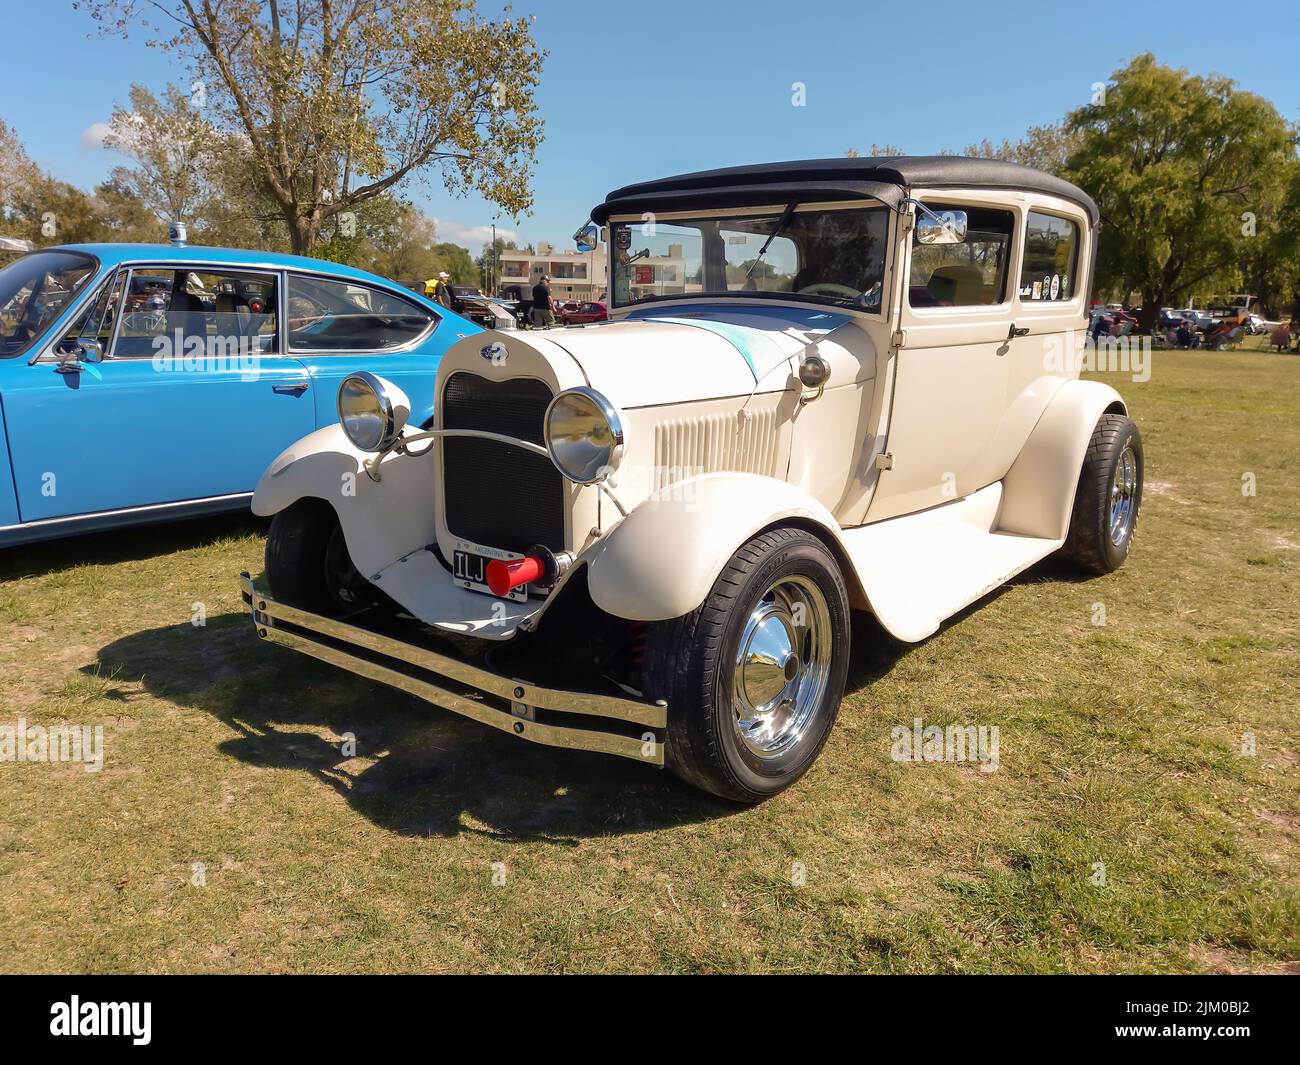 Chascomus, Argentina - Apr 9, 2022: Old white Ford Model A Tudor sedan 1928 - 1931. Nature green grass and trees background. Classic car show. Copyspa Stock Photo